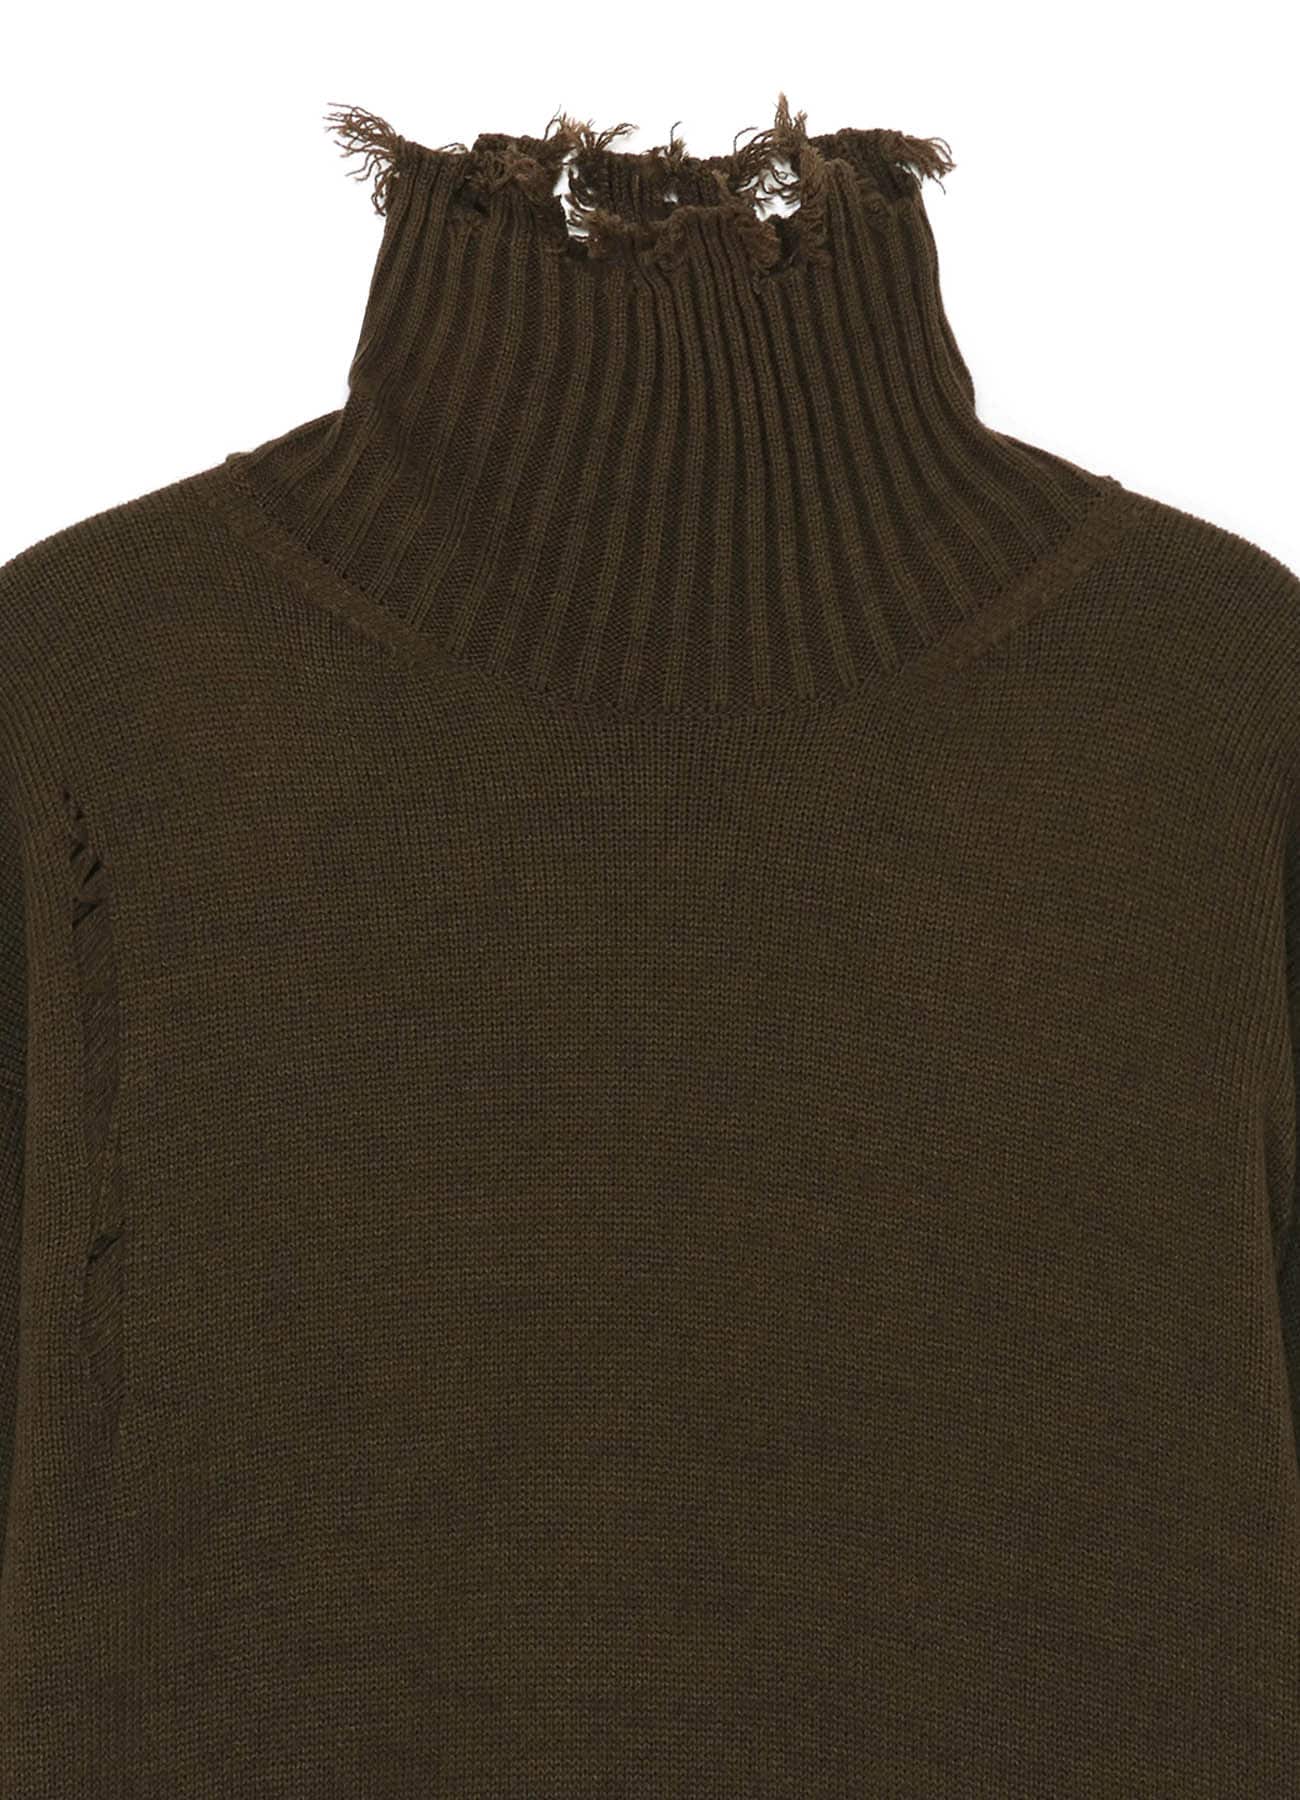 7G BULKY WOOL DAMAGE TURTLE PULLOVER